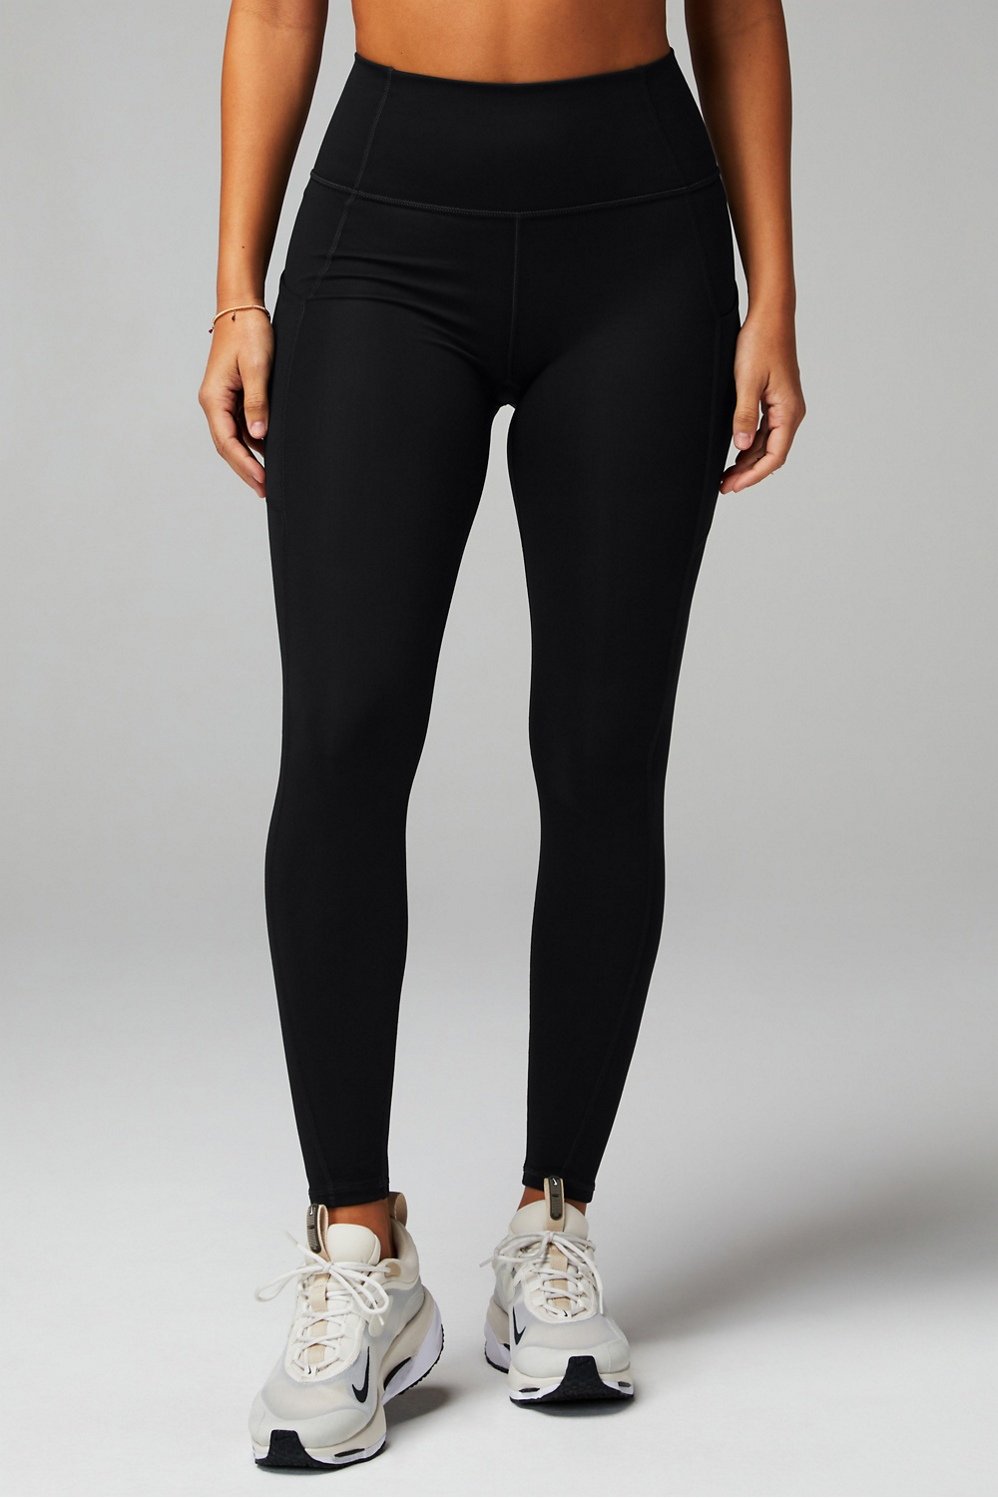 Oasis PureLuxe High-Waisted Legging - Fabletics Canada